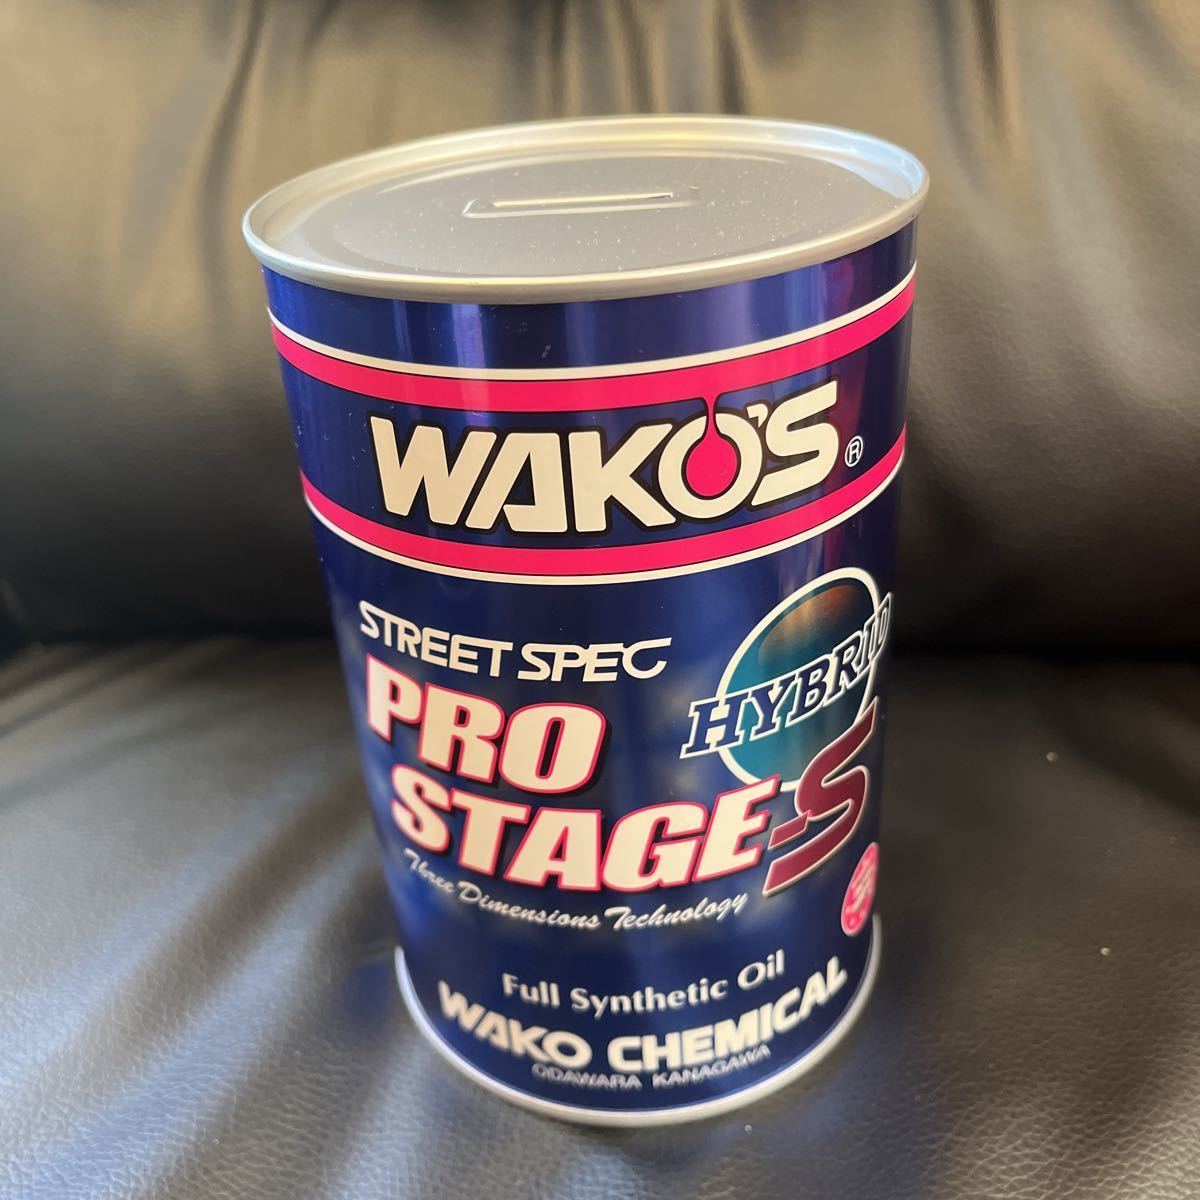  new goods unused goods WAKOS Waco's. oil can 1 can savings box pail can PROSTAGE-S HYBRID WAKO CHEMICAL garage interior small articles .